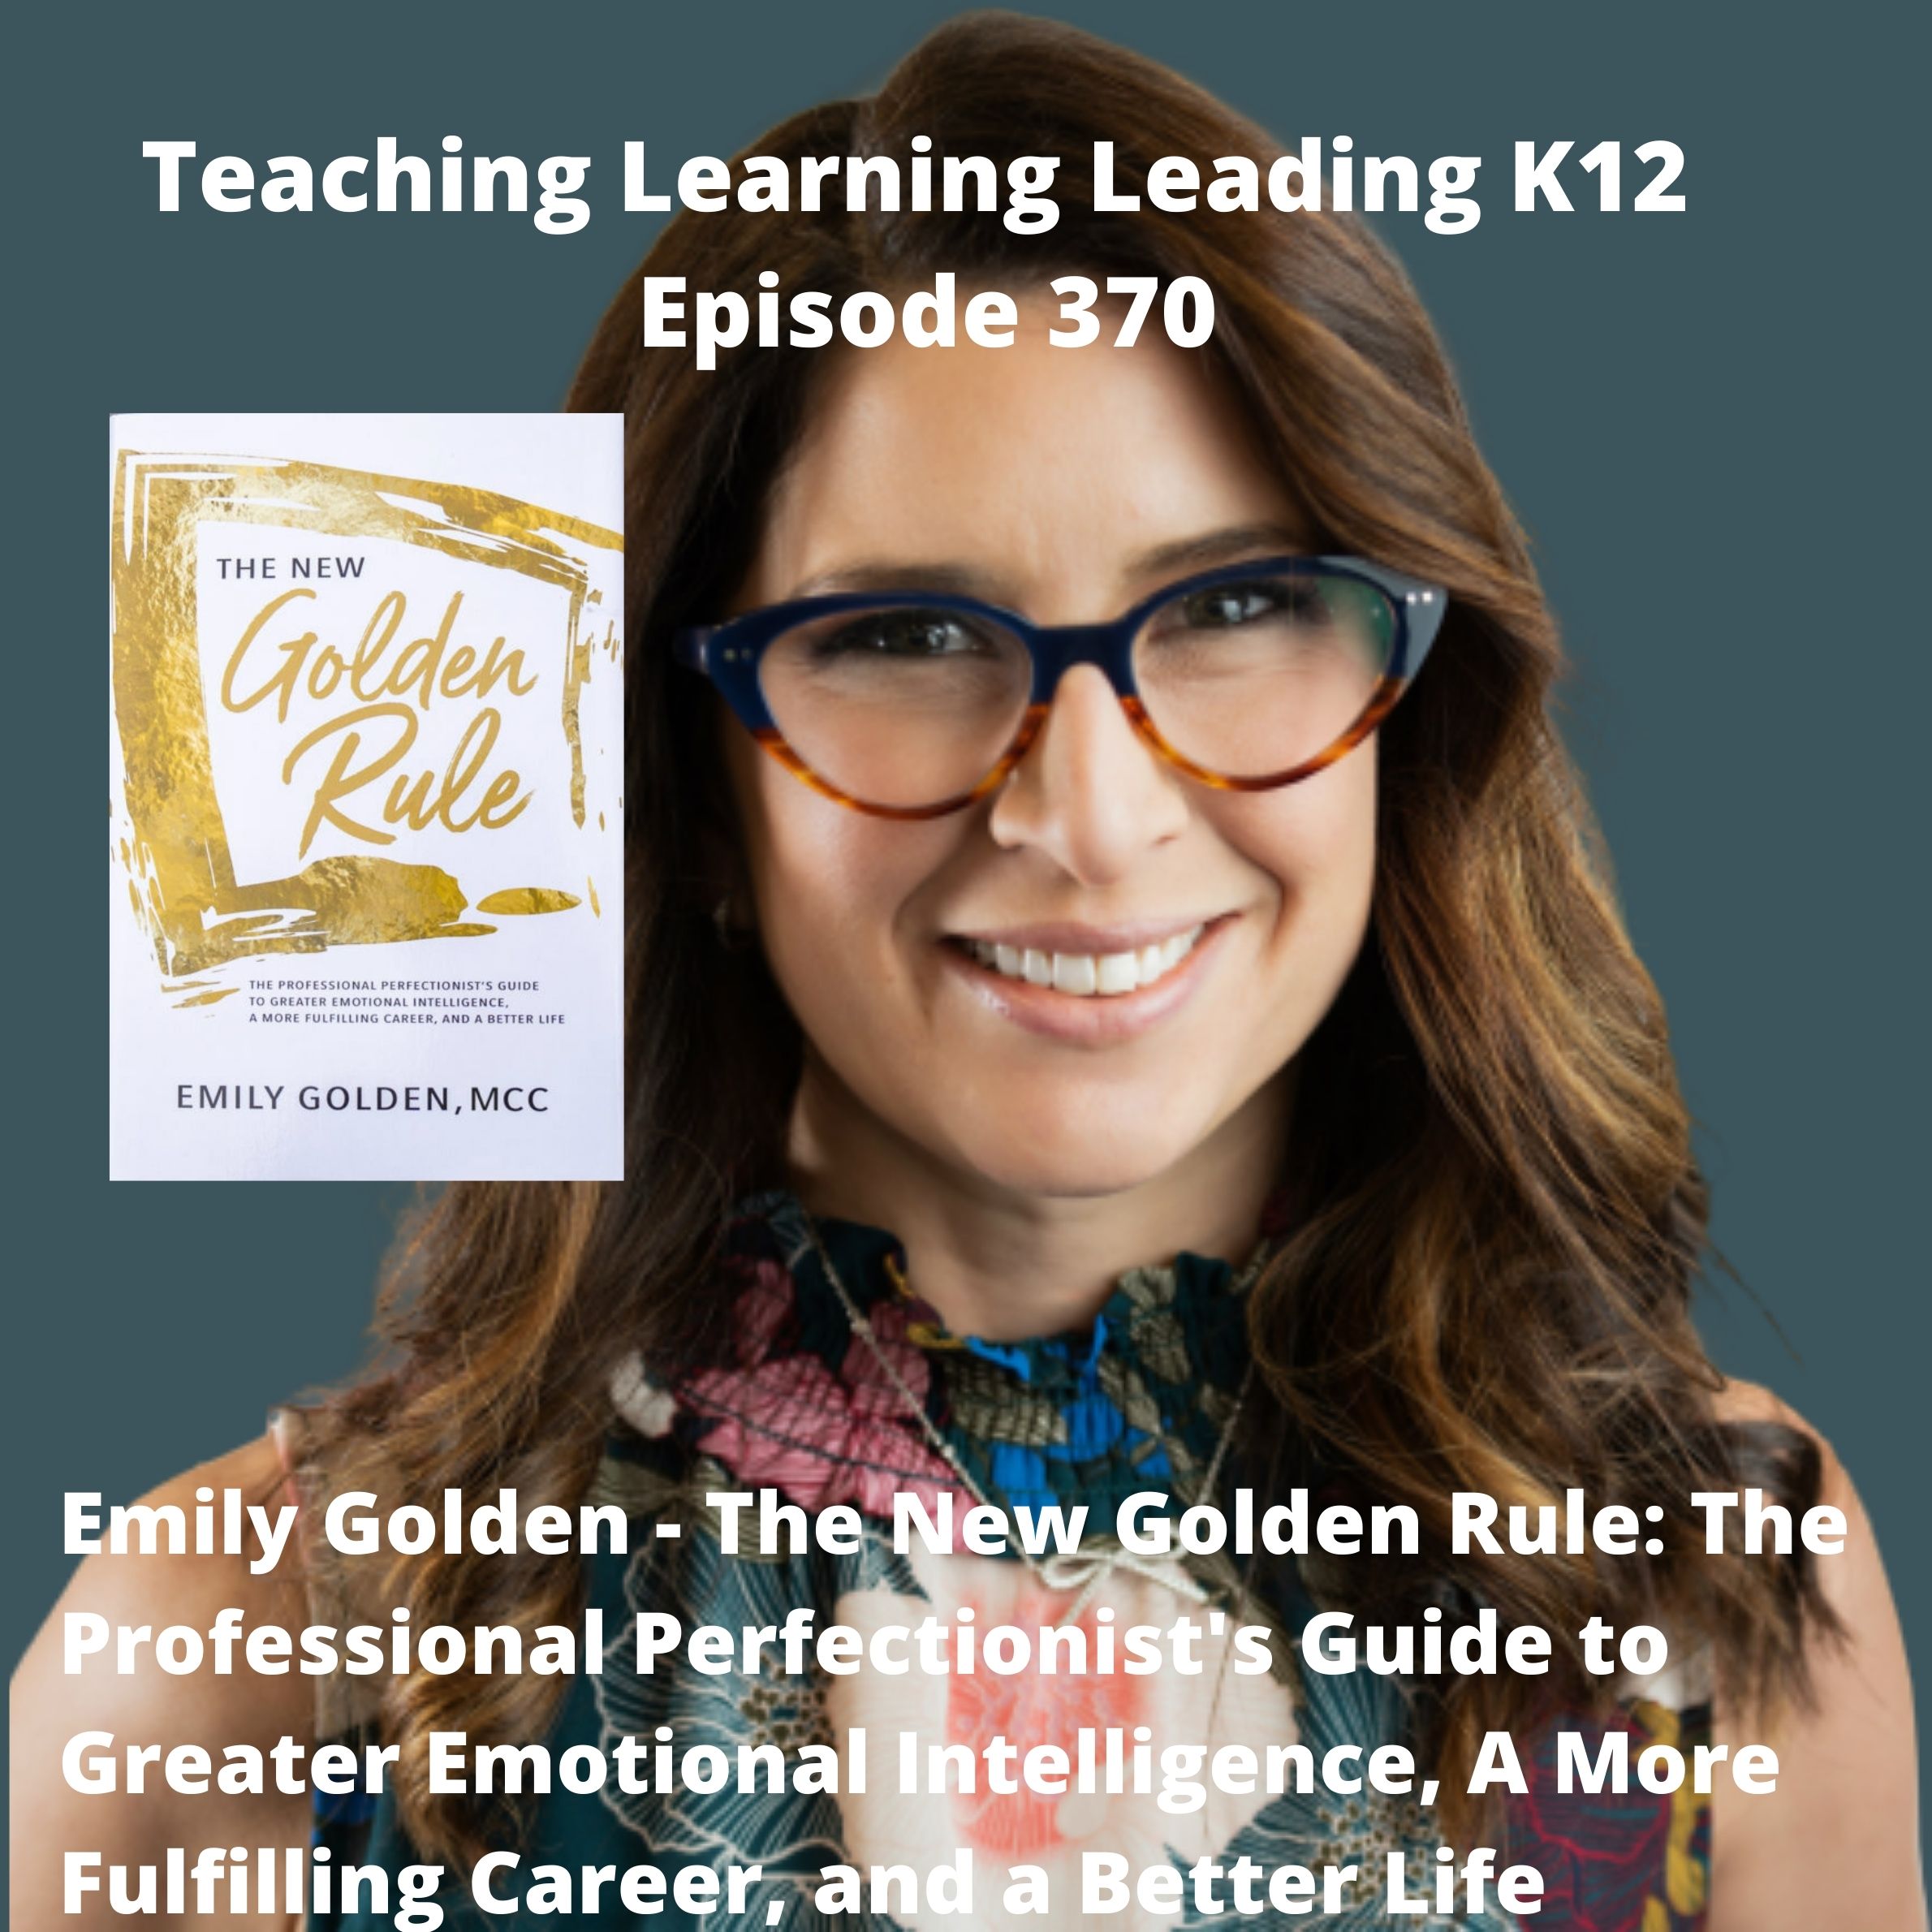 Emily Golden - The New Golden Rule: The Professional Perfectionist's Guide to Greater Emotional Intelligence, A More Fulfilling Career, and A Better Life - 370